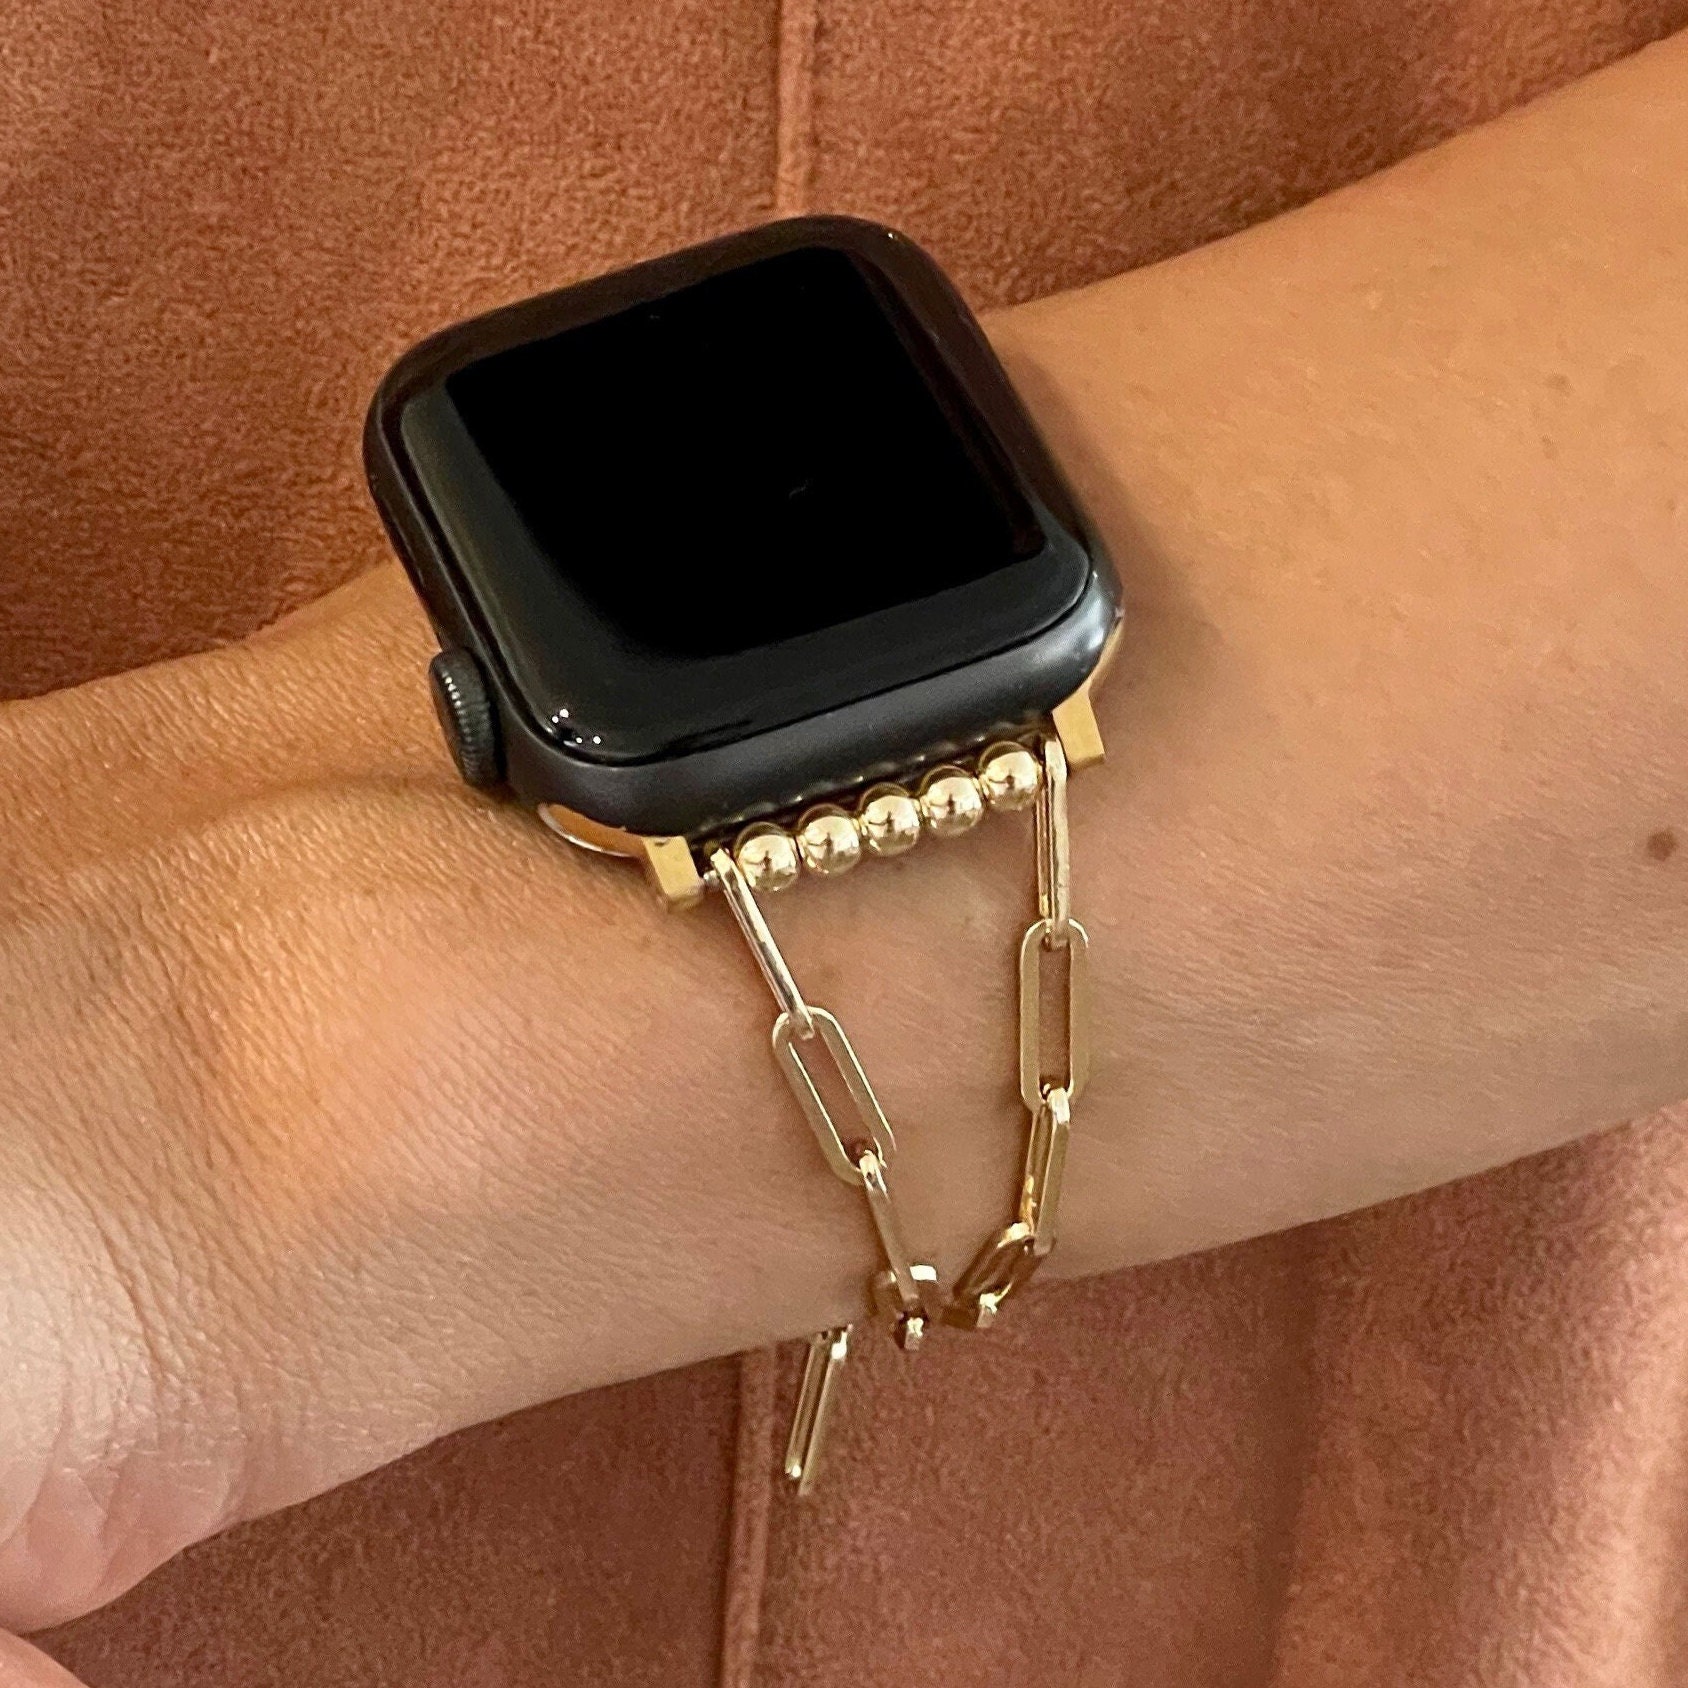  Luxury Designer Watch Band Compatible with Apple Watch